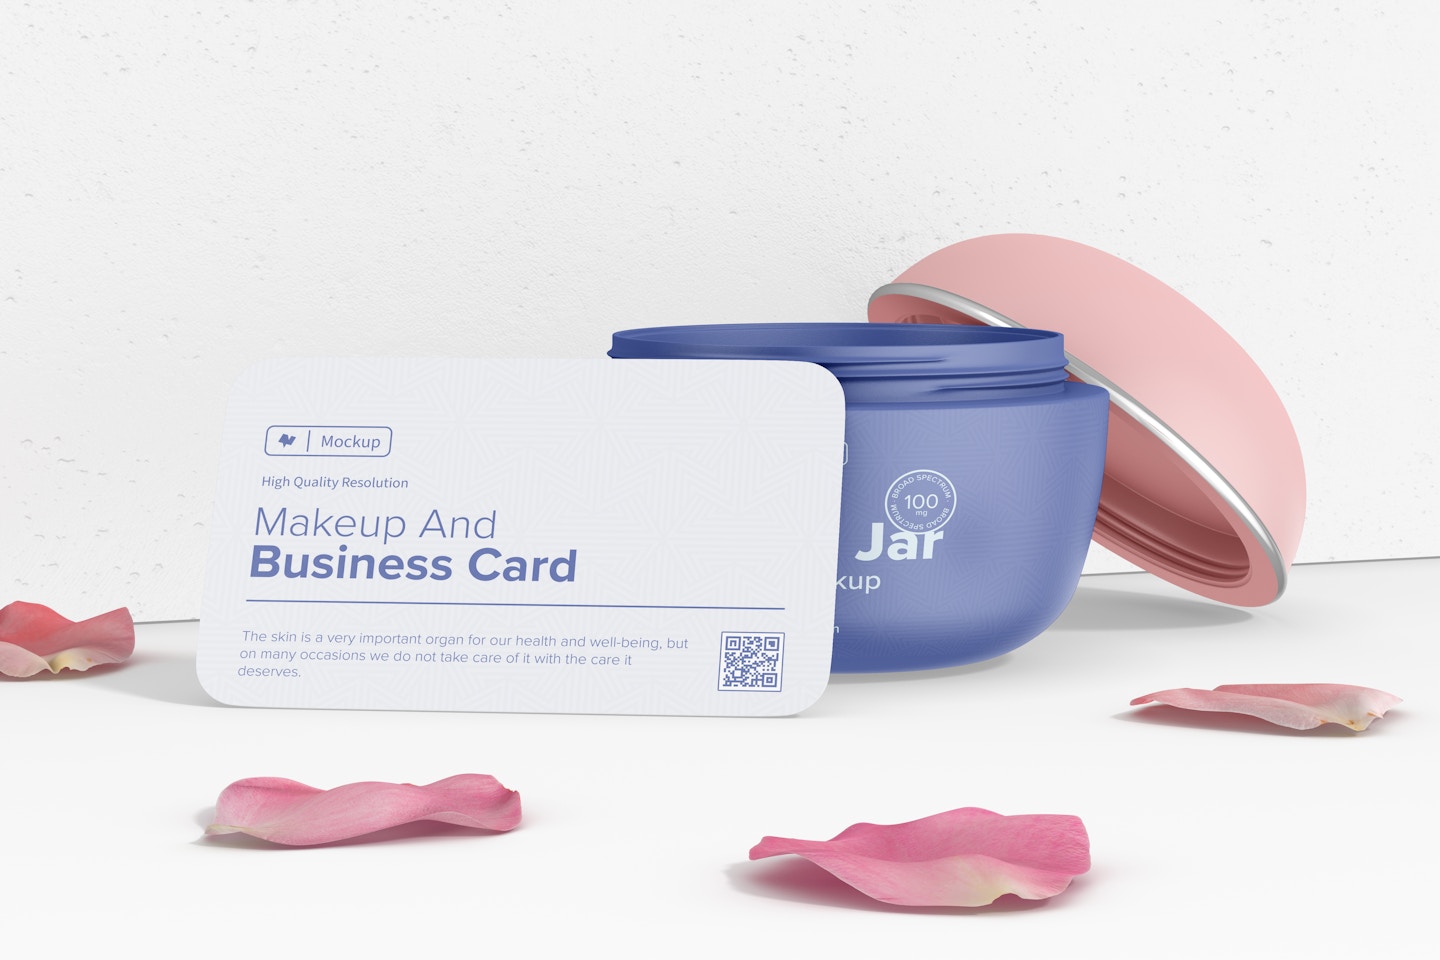 Makeup and Business Card Scene Mockup, Perspective